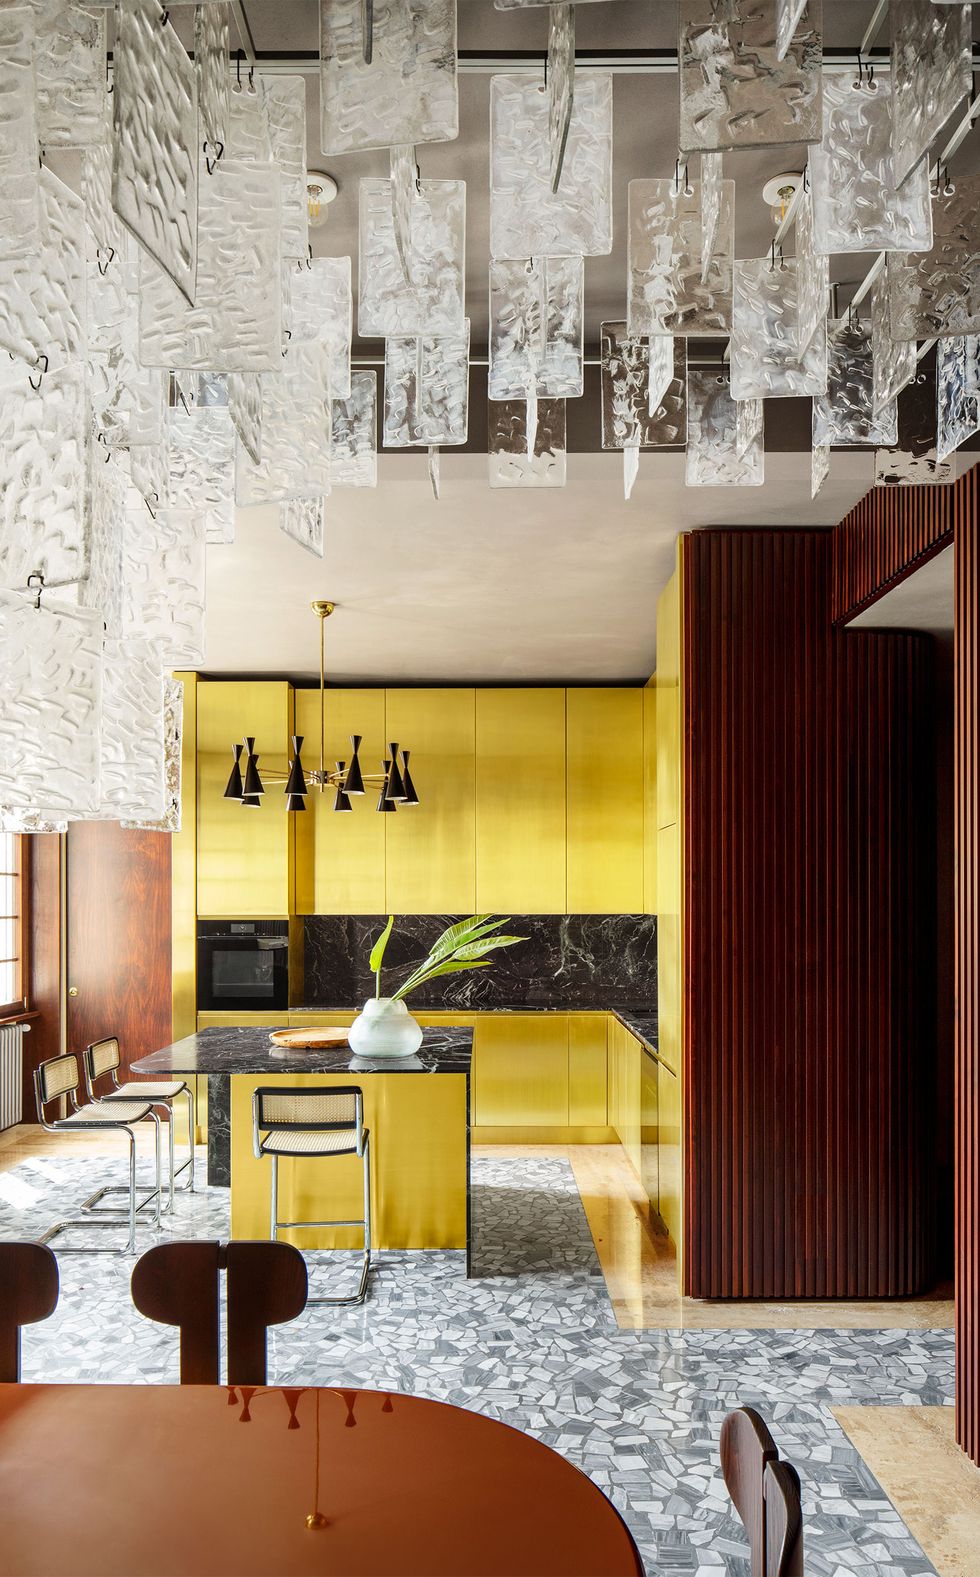 kitchen with shiny brass cabinetry and terrazzo floor and vintage stools at island